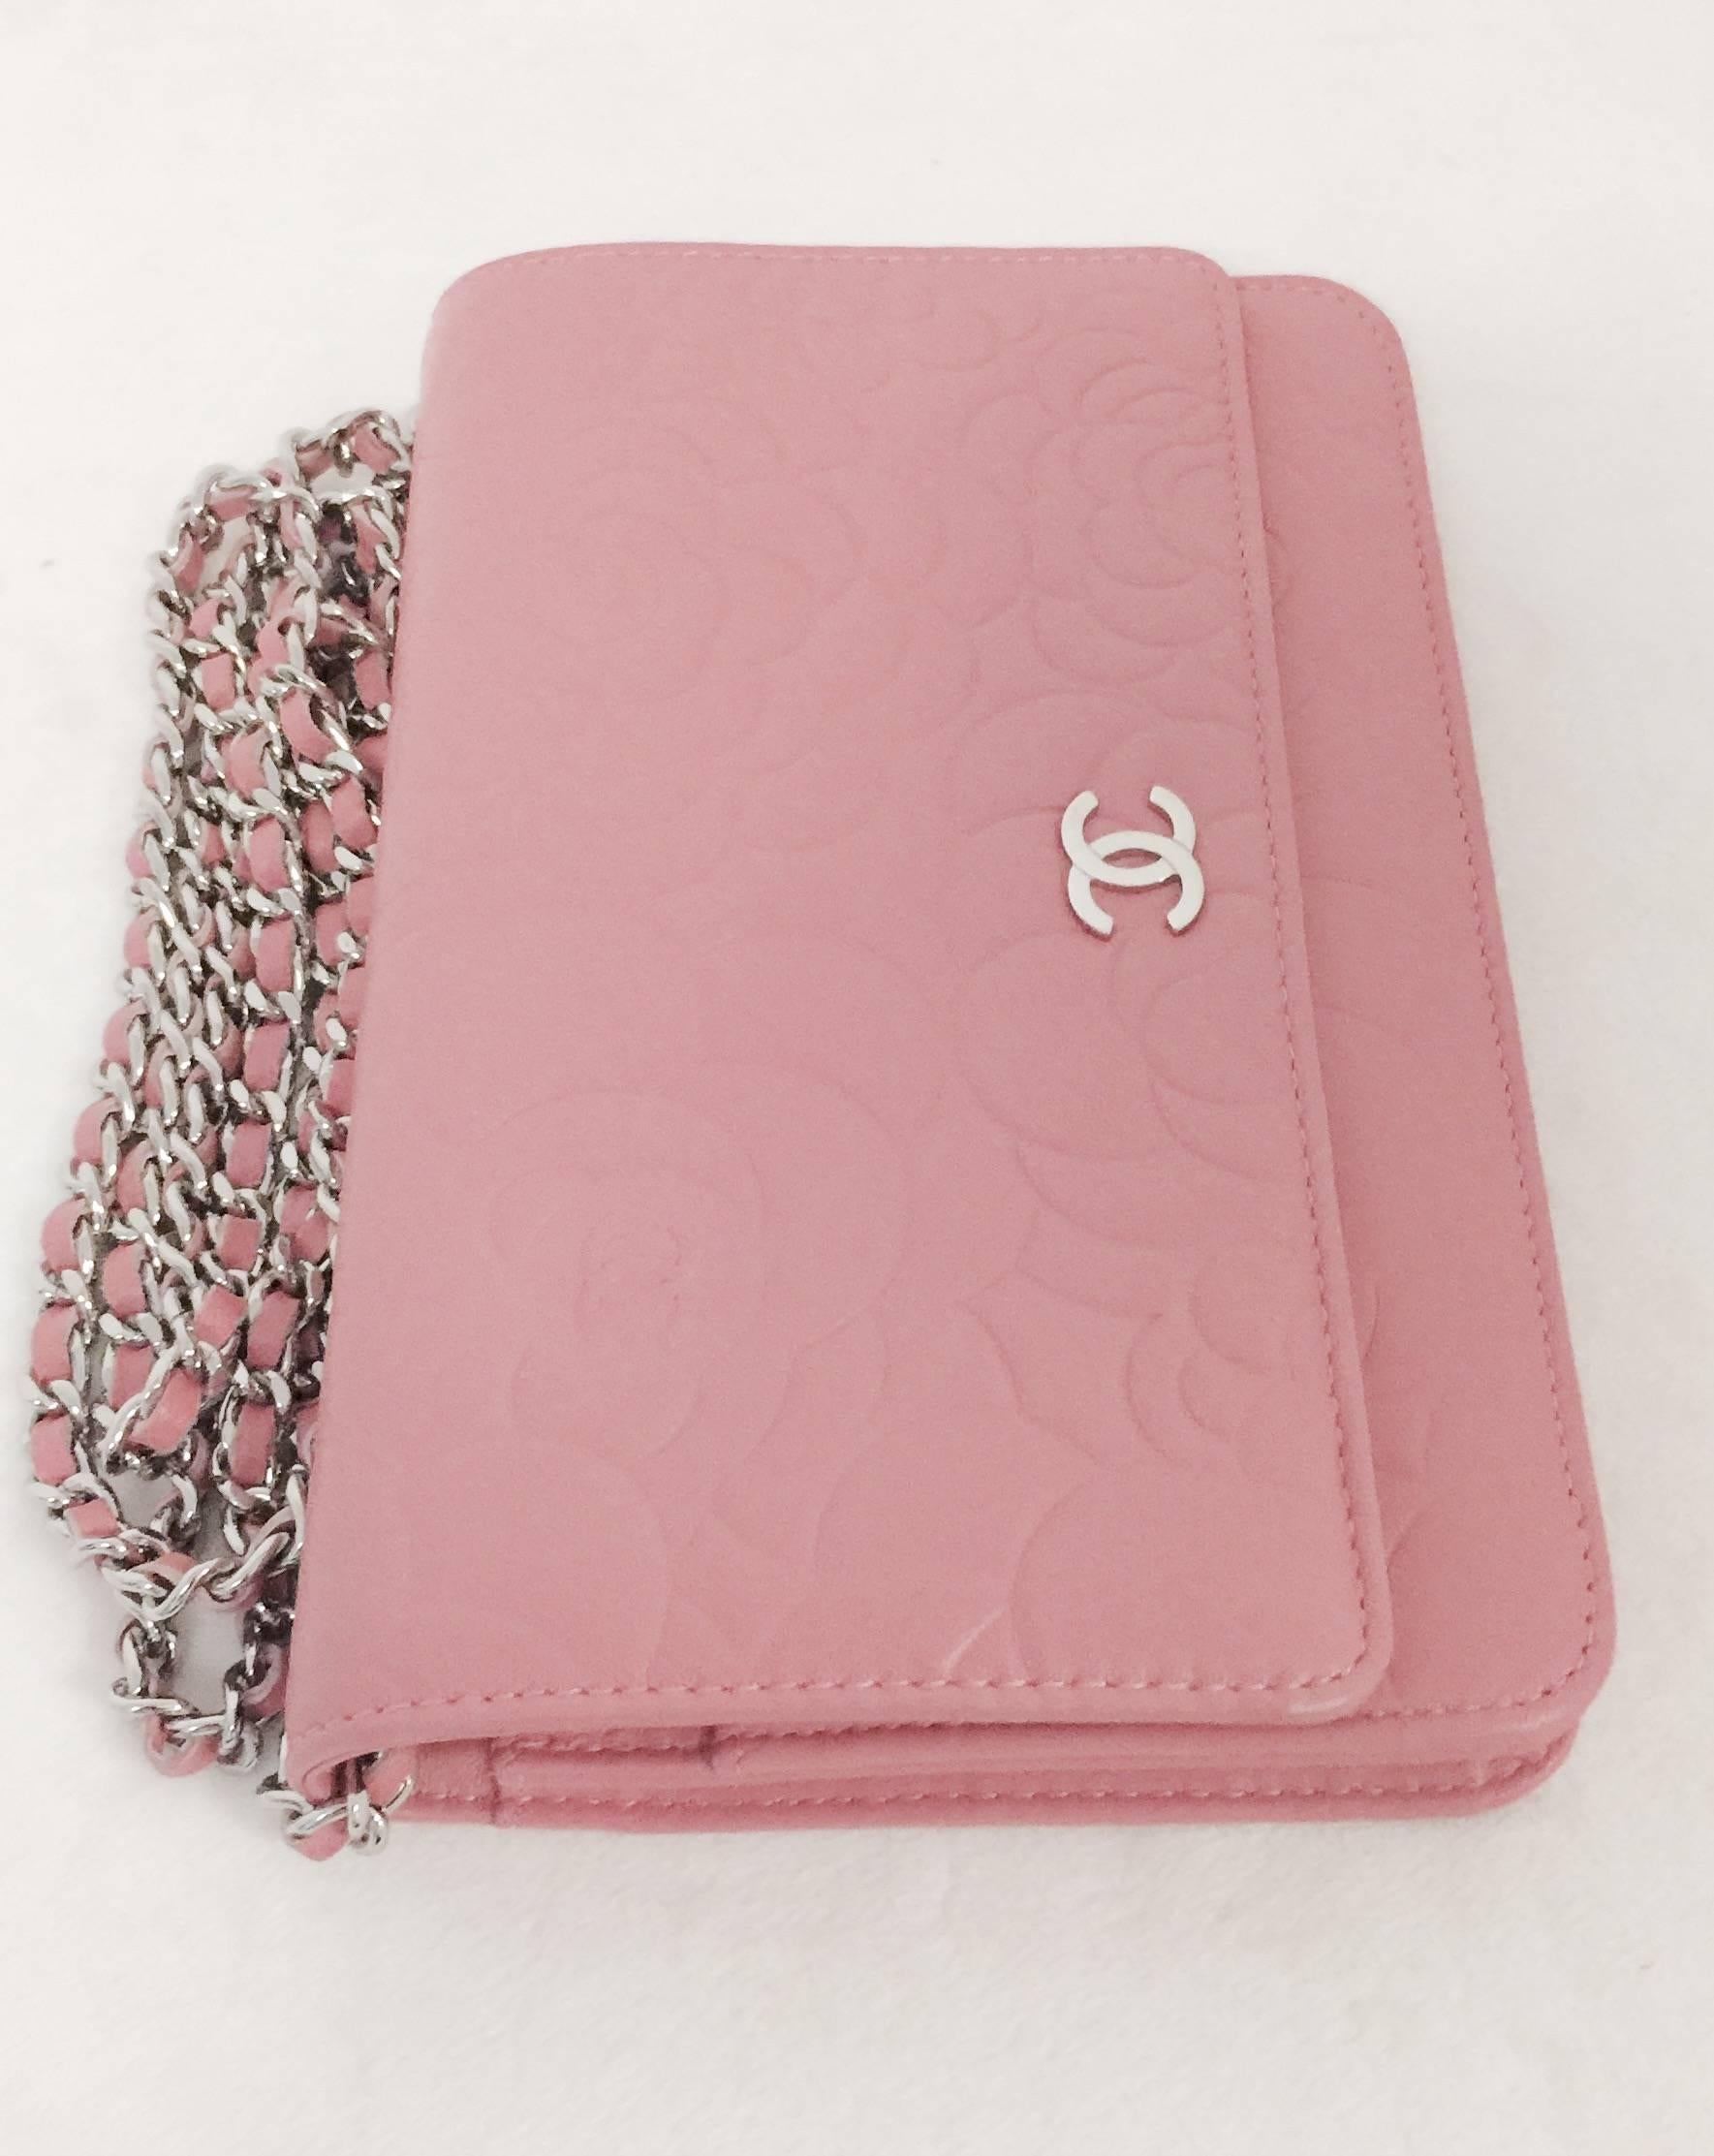 NEW Chanel Pink Camellia Embossed Lambskin Wallet/Chain Bag Serial 1480062 1